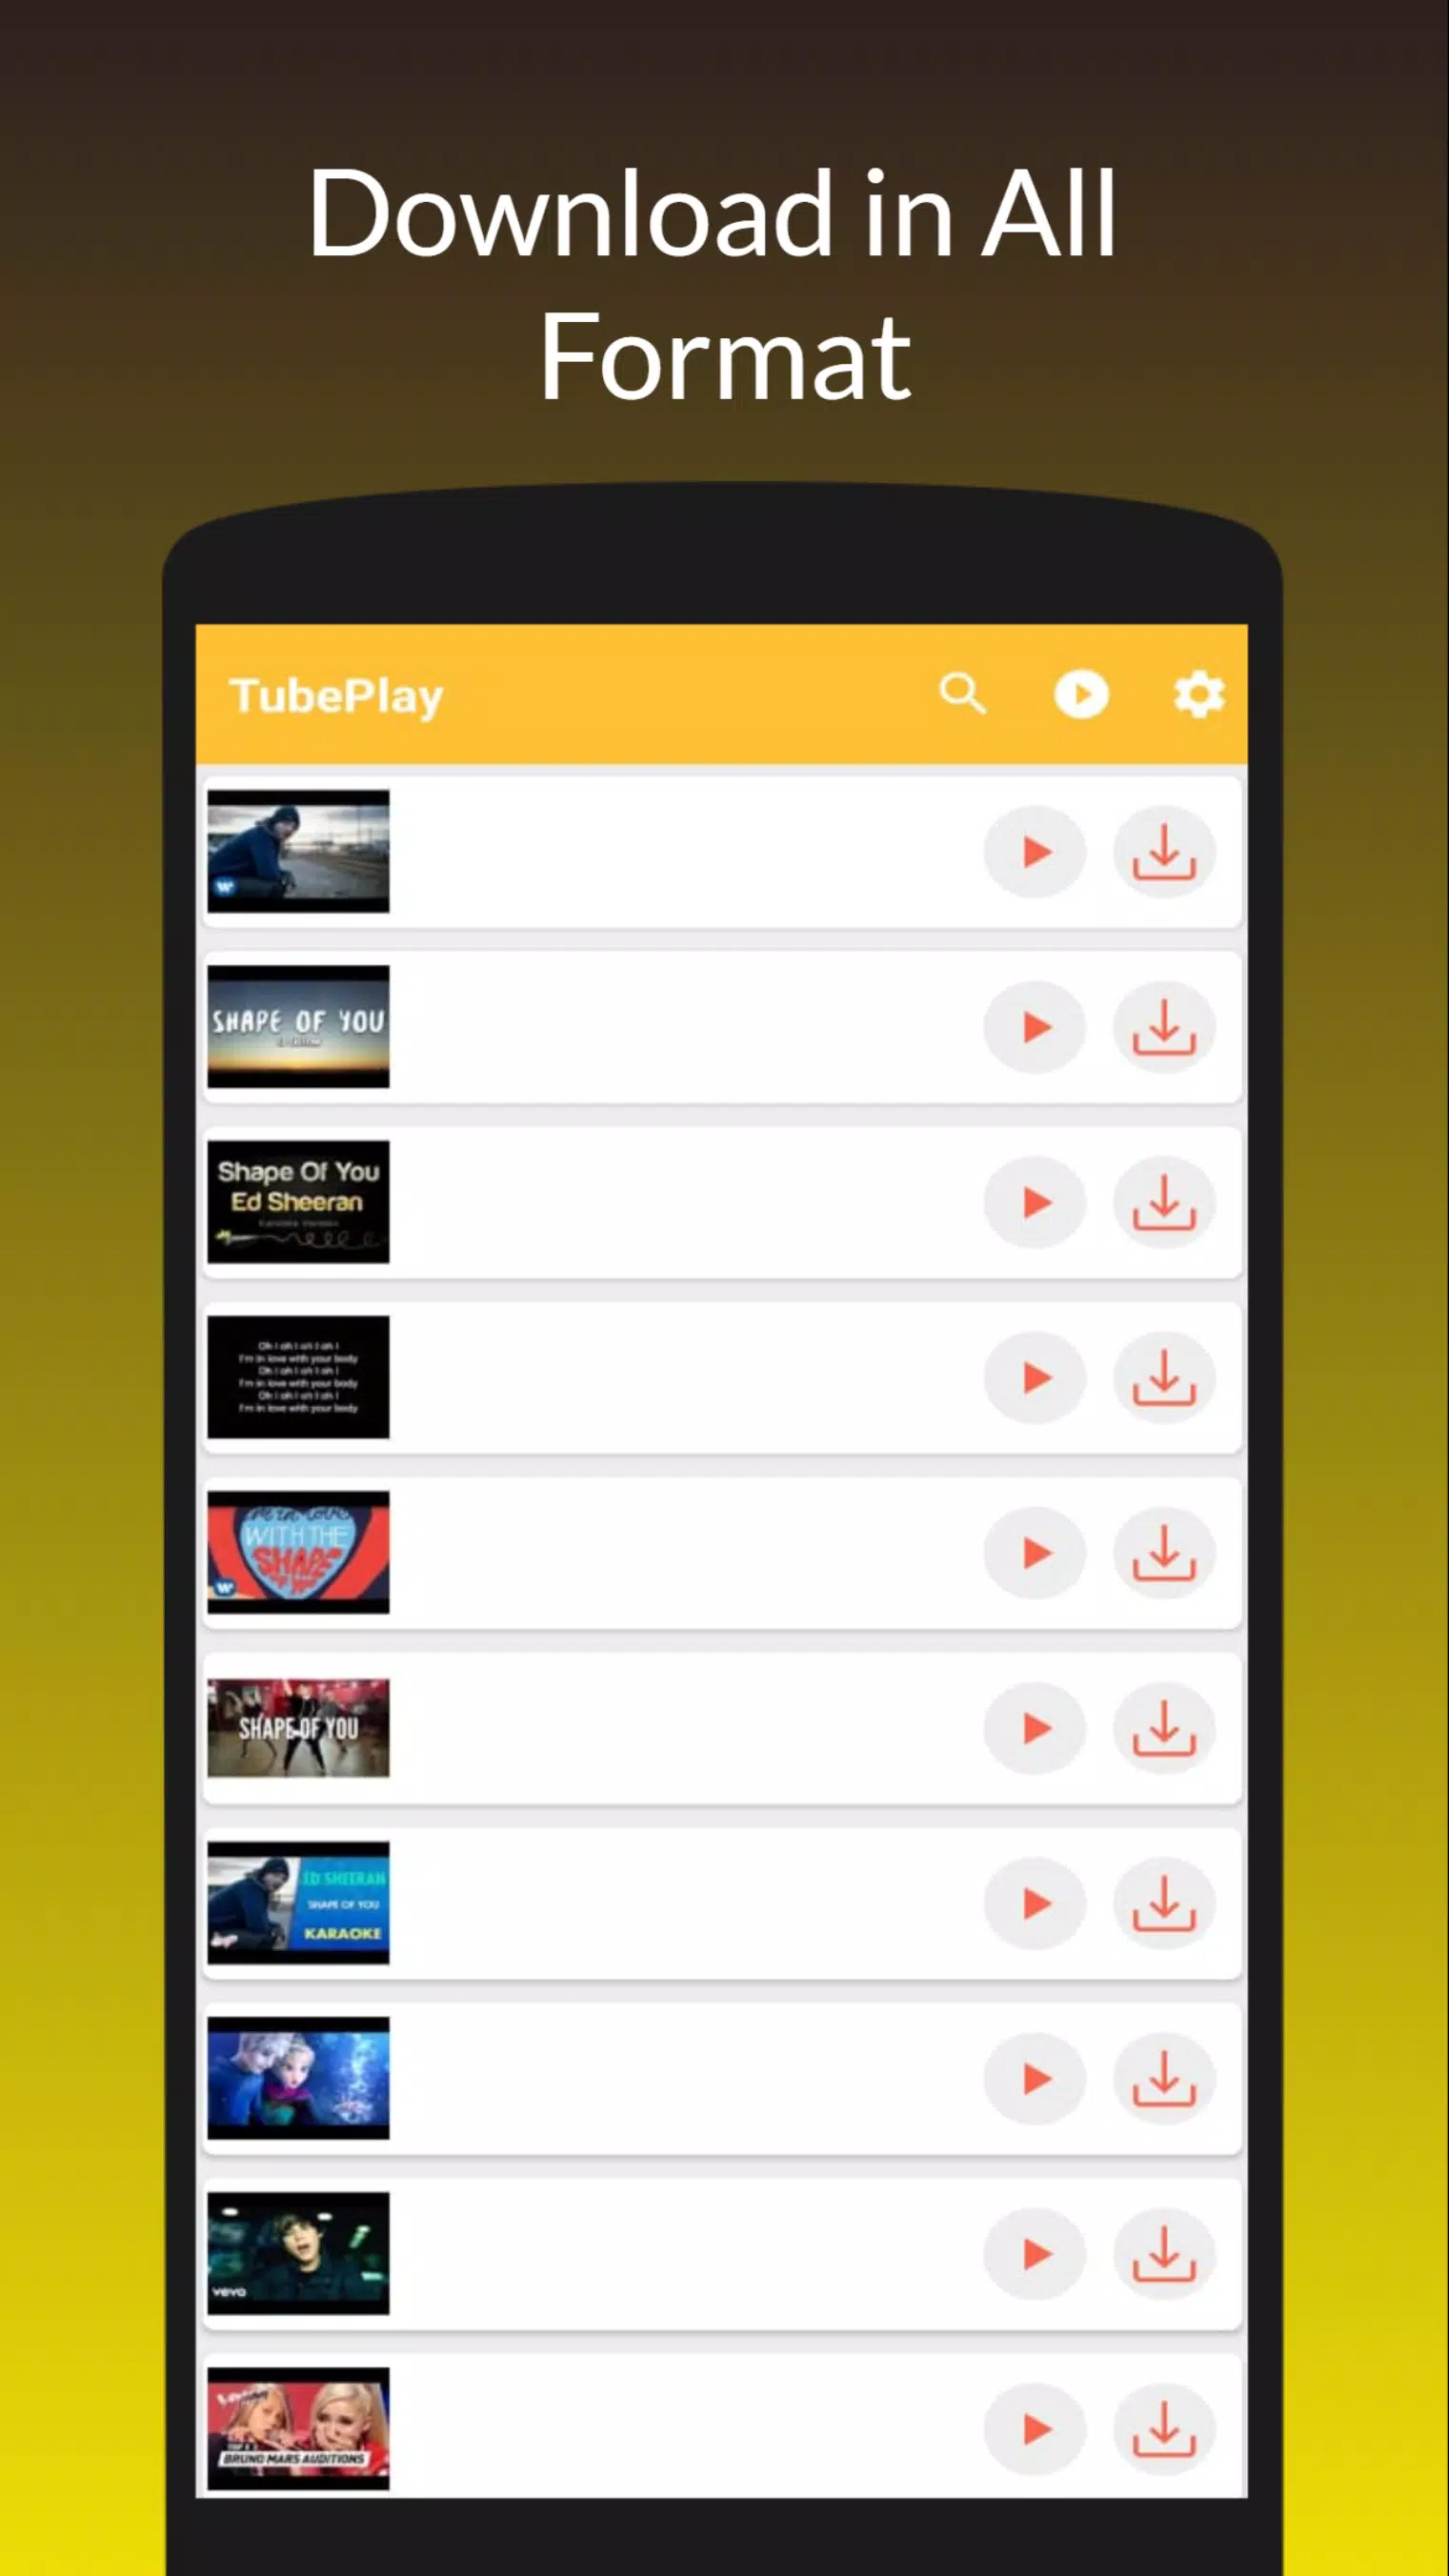 Tube Music Downloader - Tube play mp3 Downloader APK for Android Download